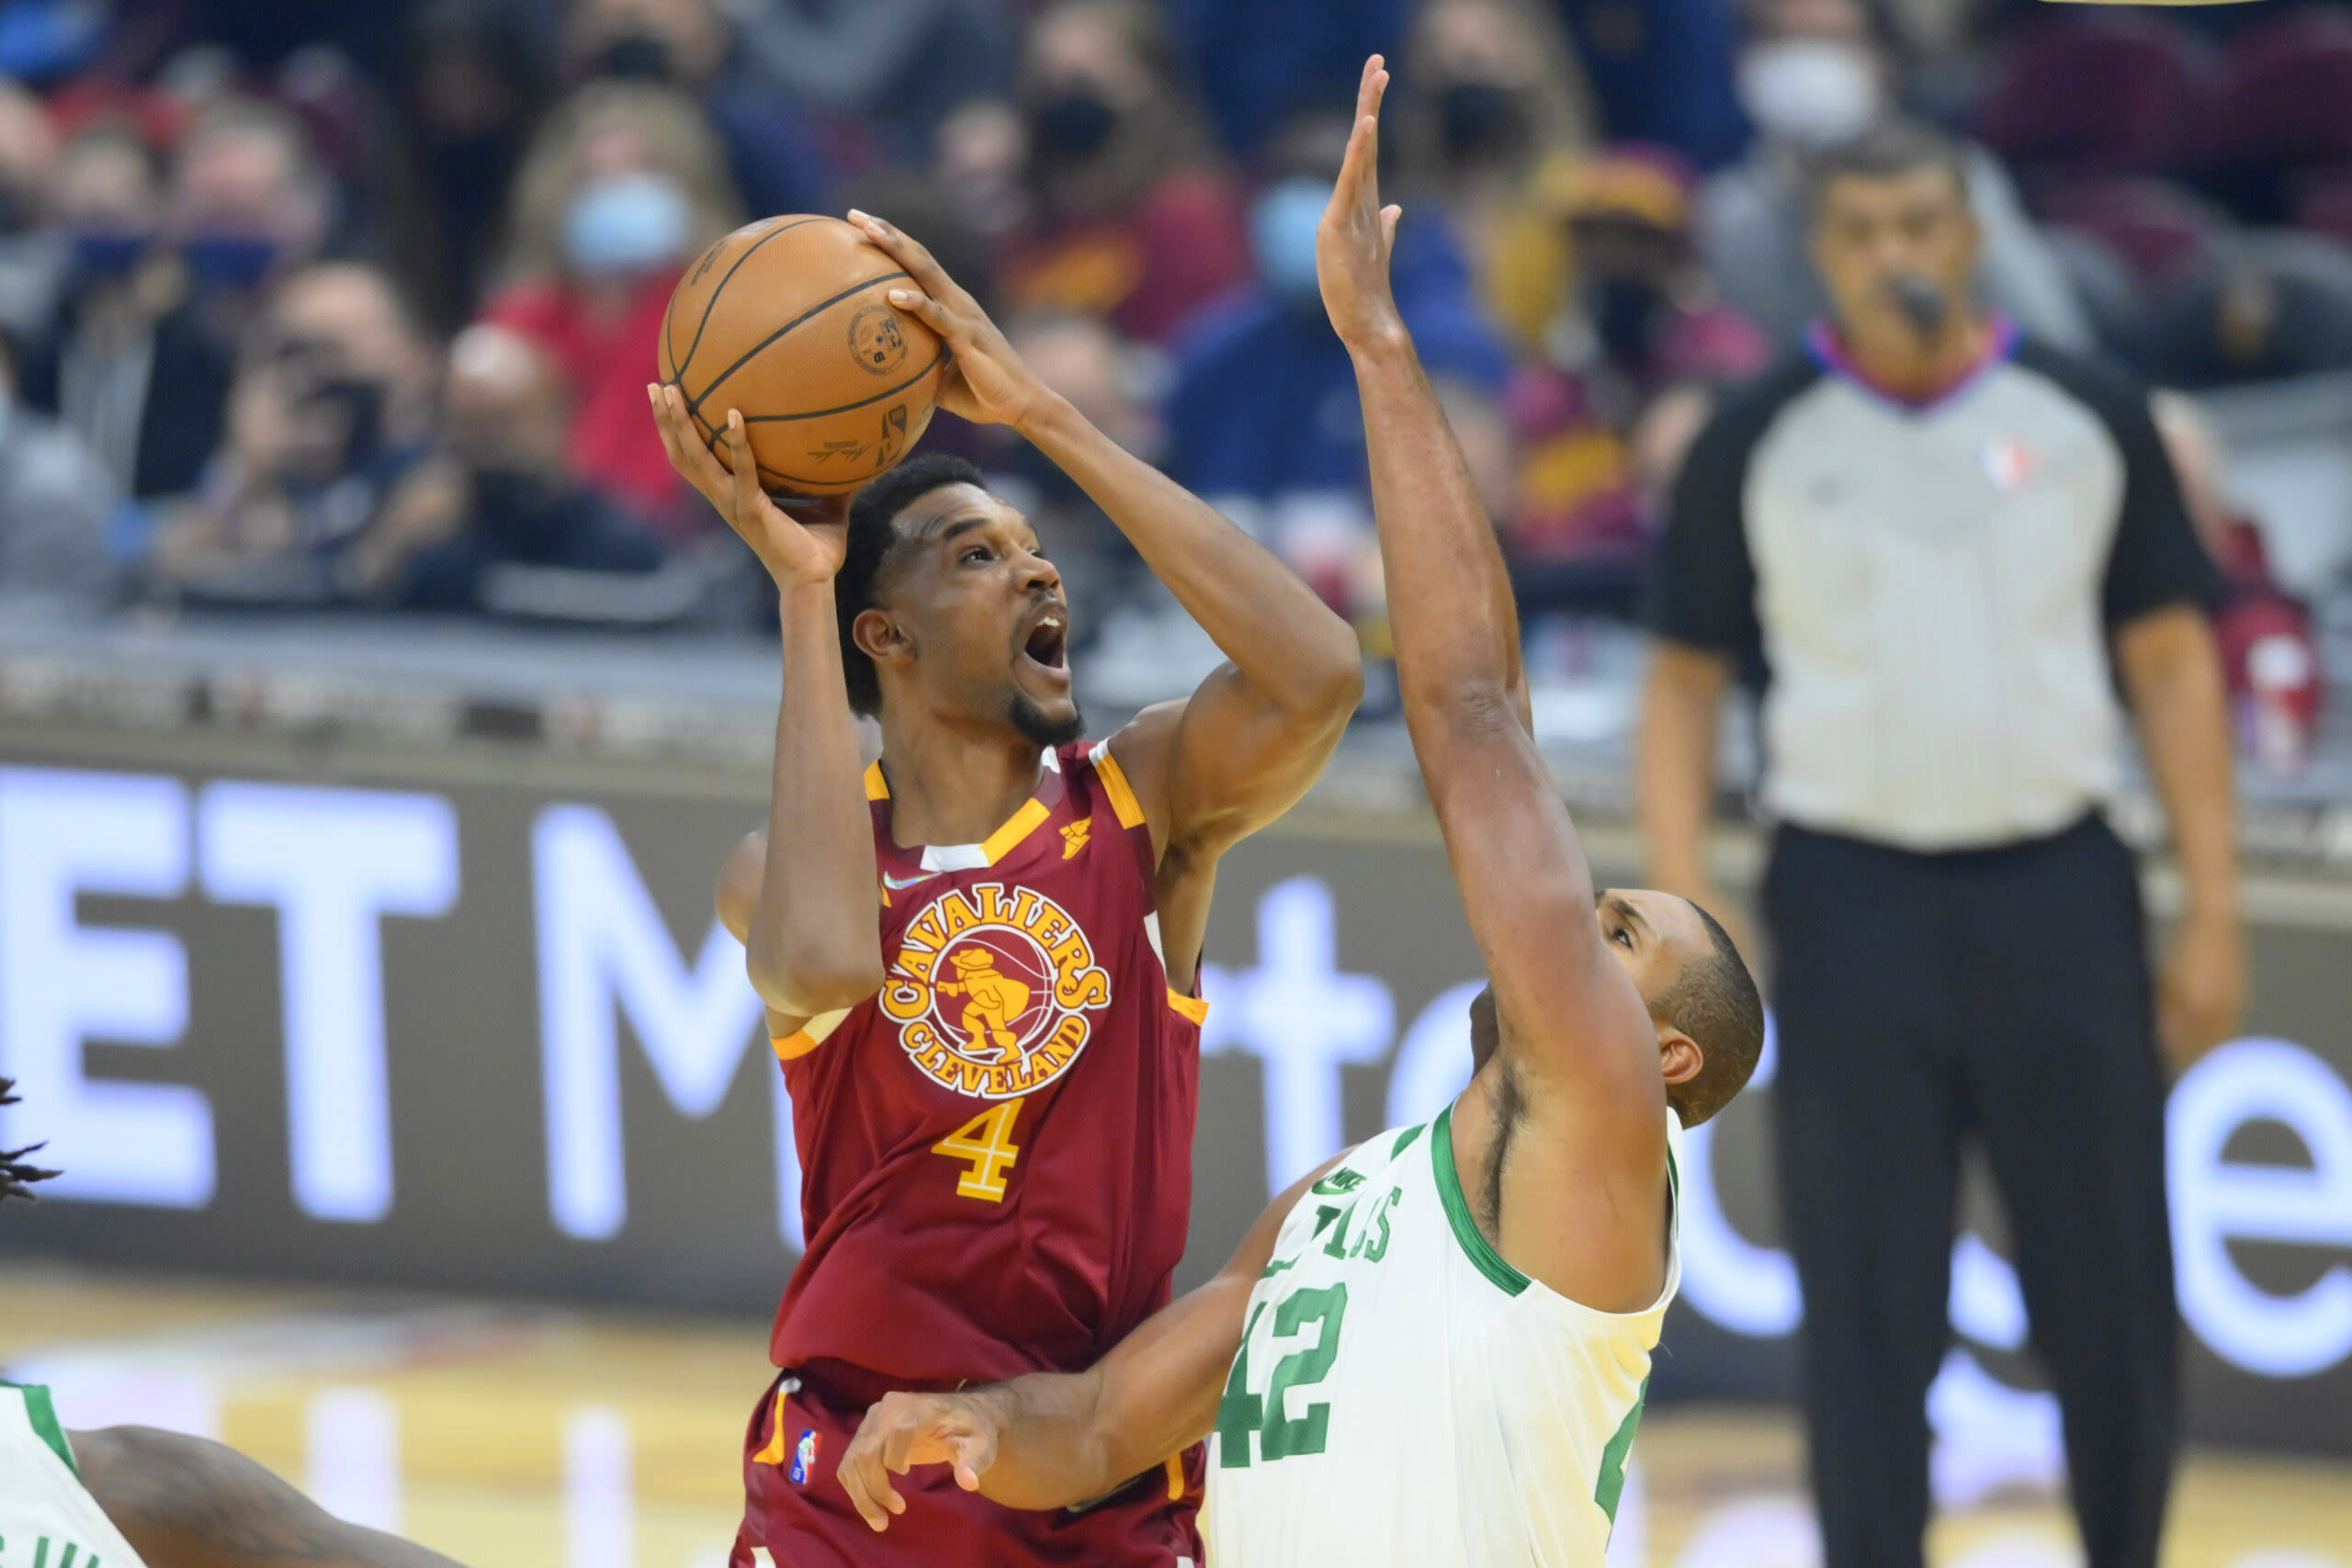 Evan Mobley likely to get max contract with Cavs